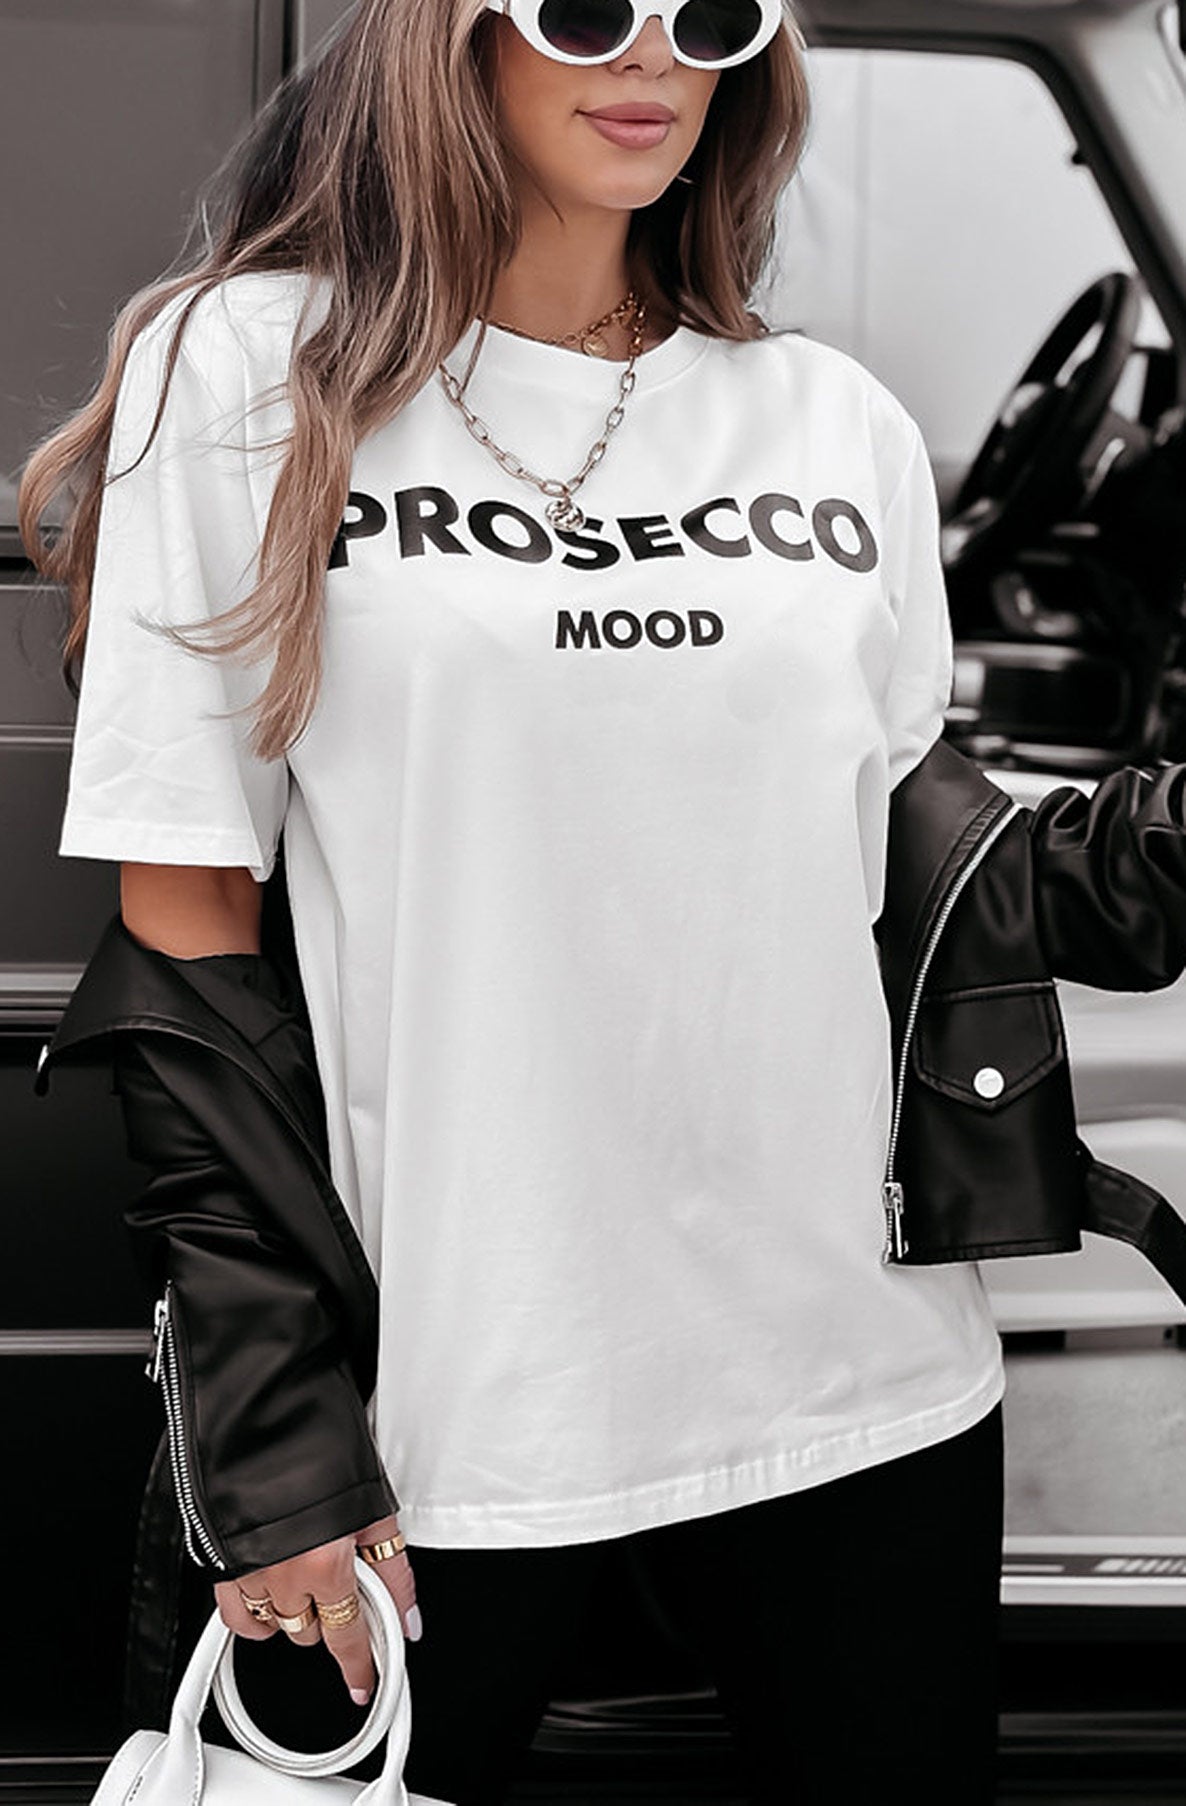 'Prosecco' Mood Printed Oversized T-shirt Top-Ivory